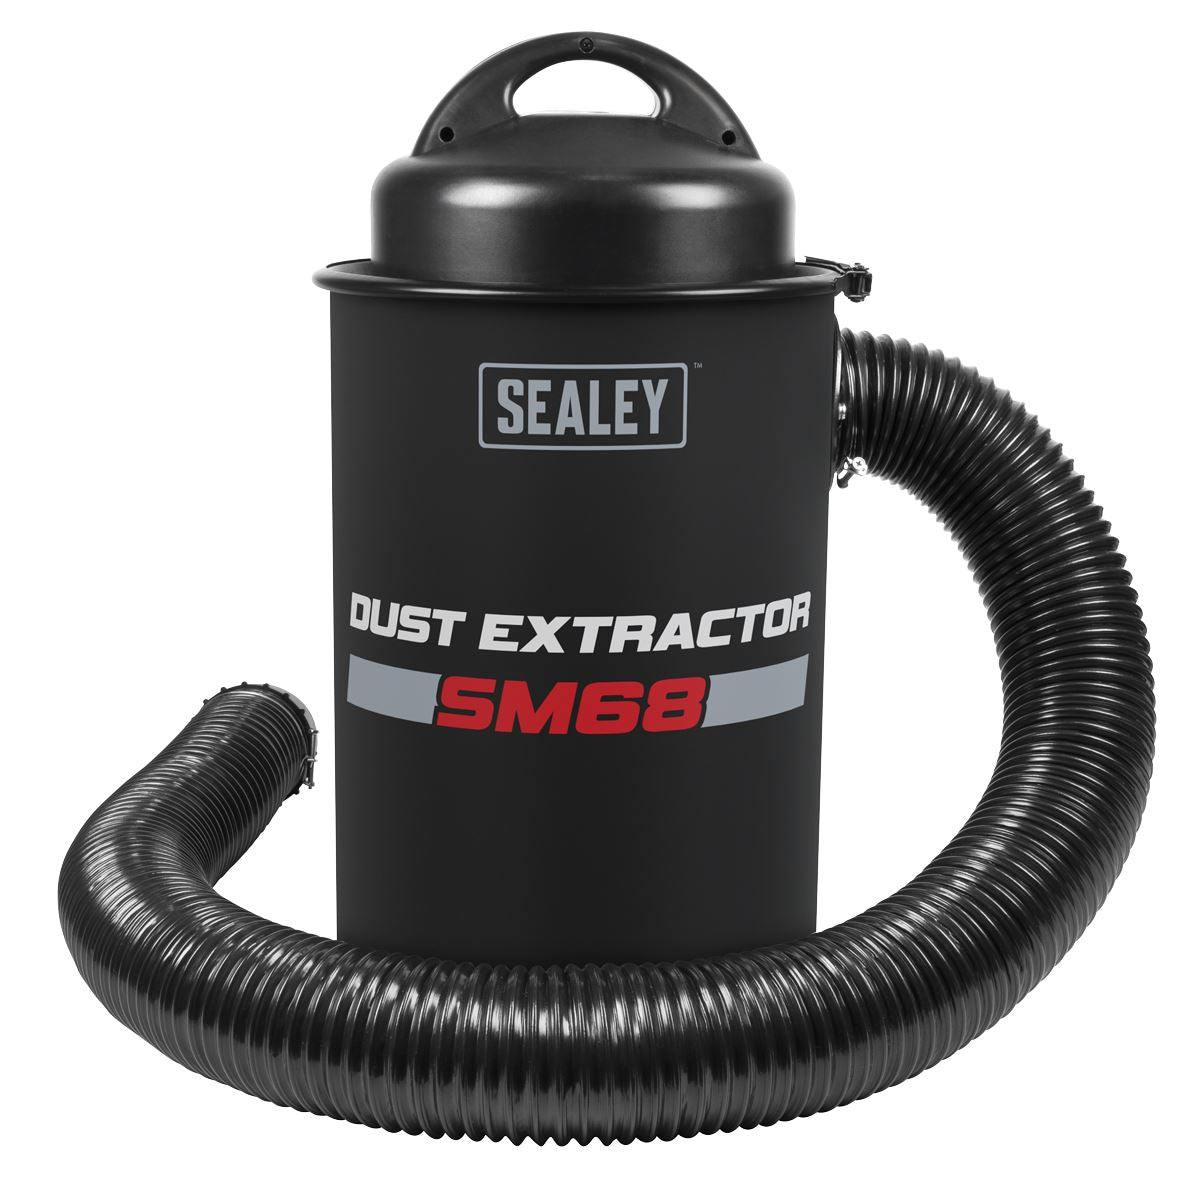 Sealey Portable Dust Extractor 50L 1200W